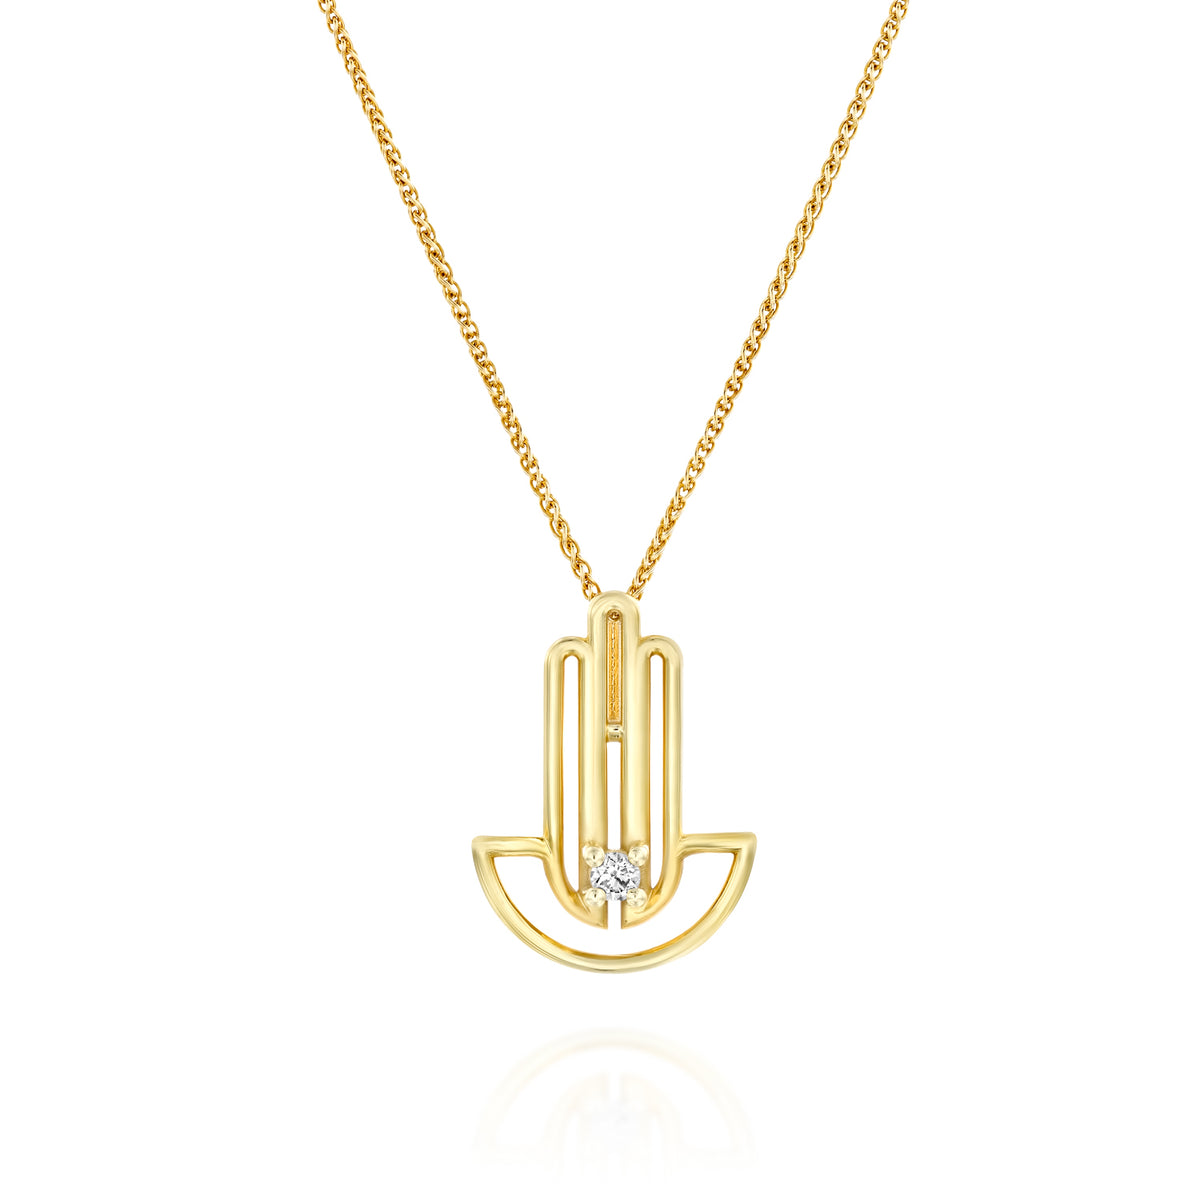 Presiada Jewelry - Hamsika necklace, a minimalist pendant with a delicate Hamsa charm, symbolizing protection and good luck.